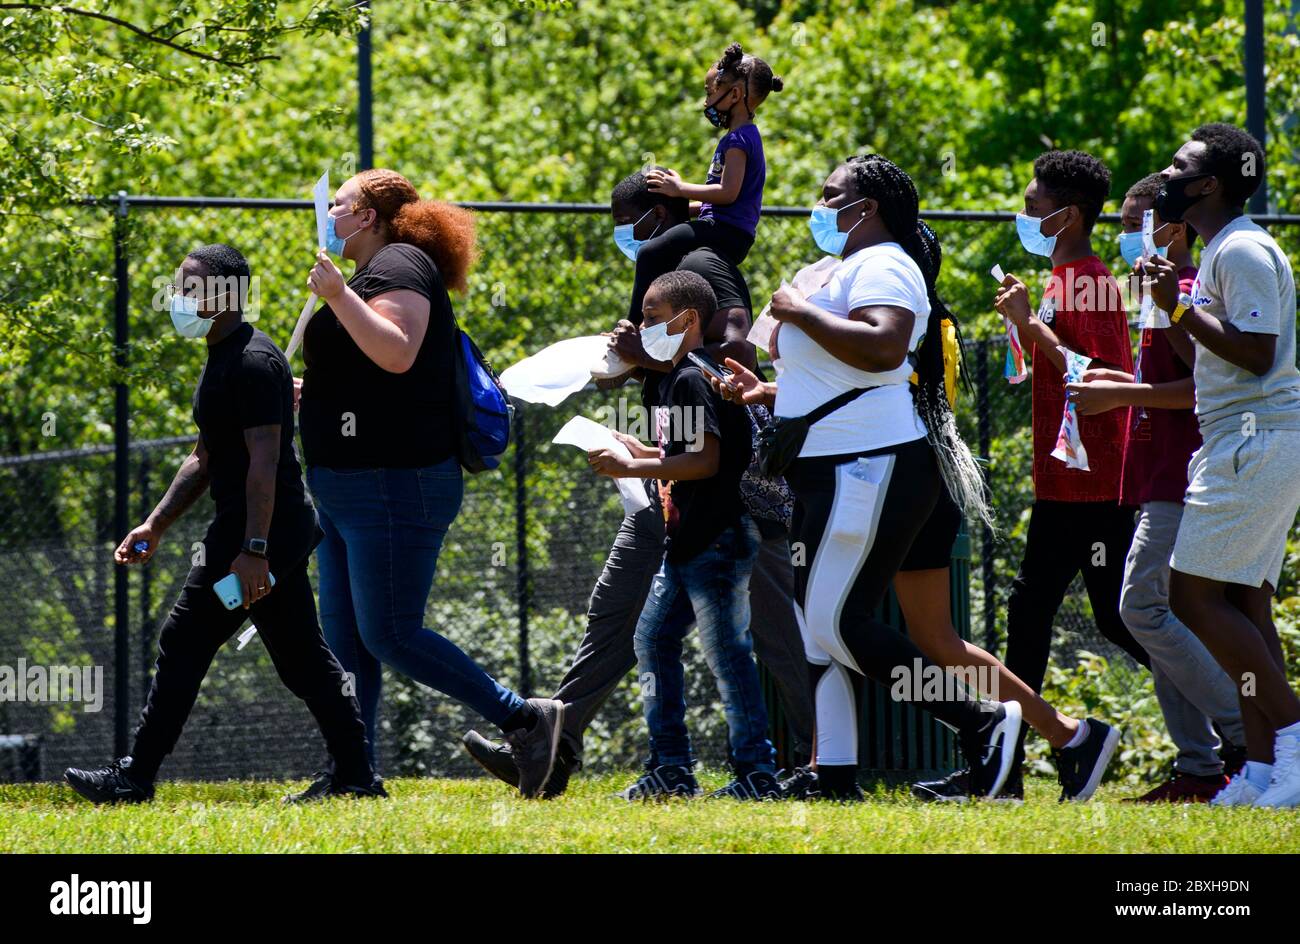 Odenton, Maryland, United State of America. 6th June, 2020. Hundreds march down Blue Water Blvd in the Seven Oaks Neighborhood of Odenton, Md. The march is in protest of the killing of George Floyd by Minneapolis police officers. Credit: Perry Aston/ZUMA Wire/Alamy Live News Stock Photo